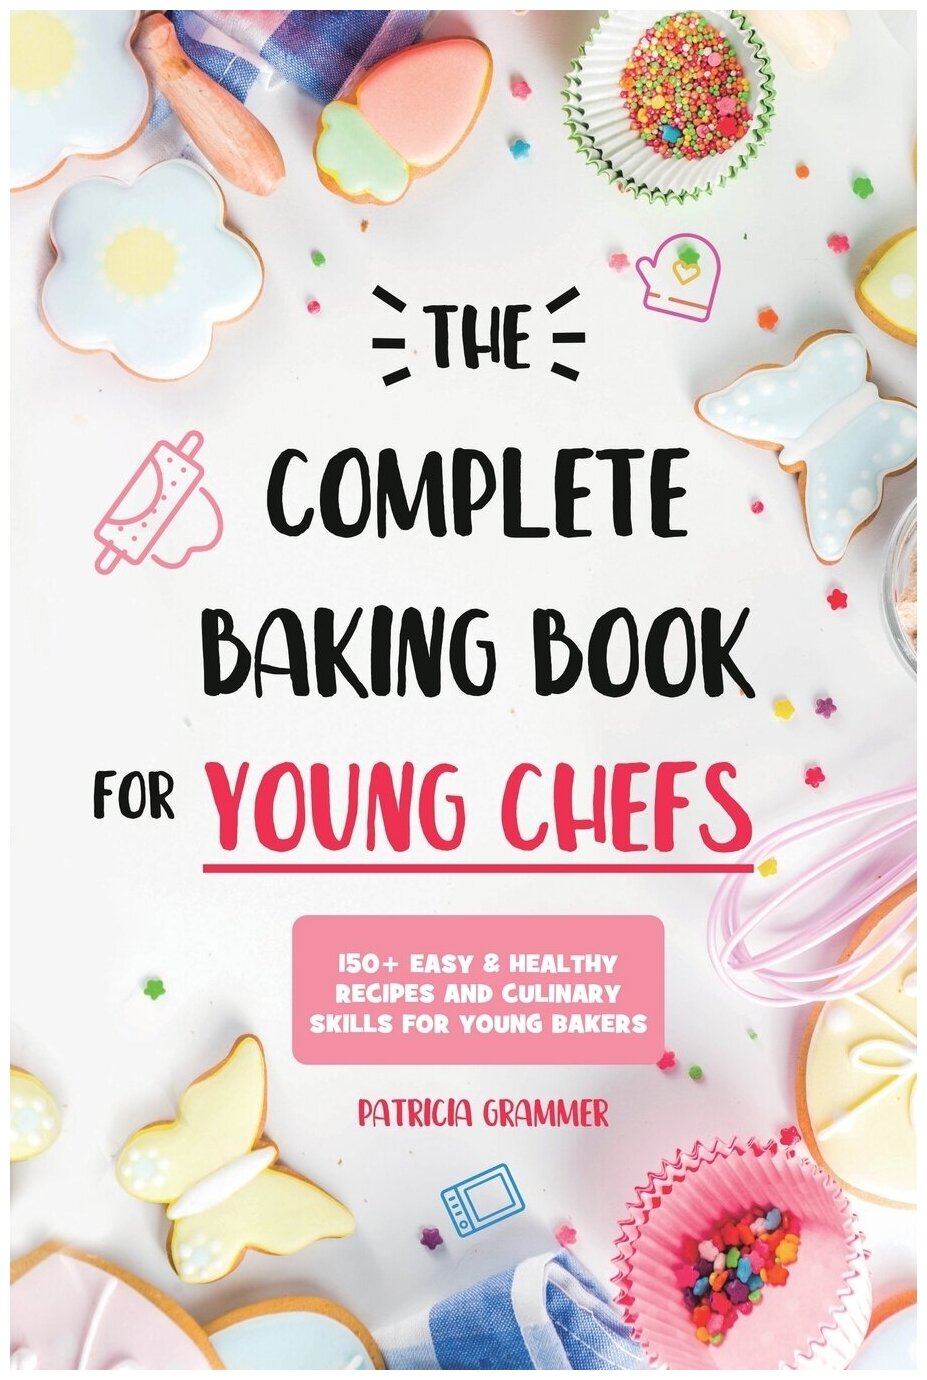 The Complete Baking Book for Young Chefs. 150+ Easy & Healthy Recipes and Culinary Skills for Young Bakers